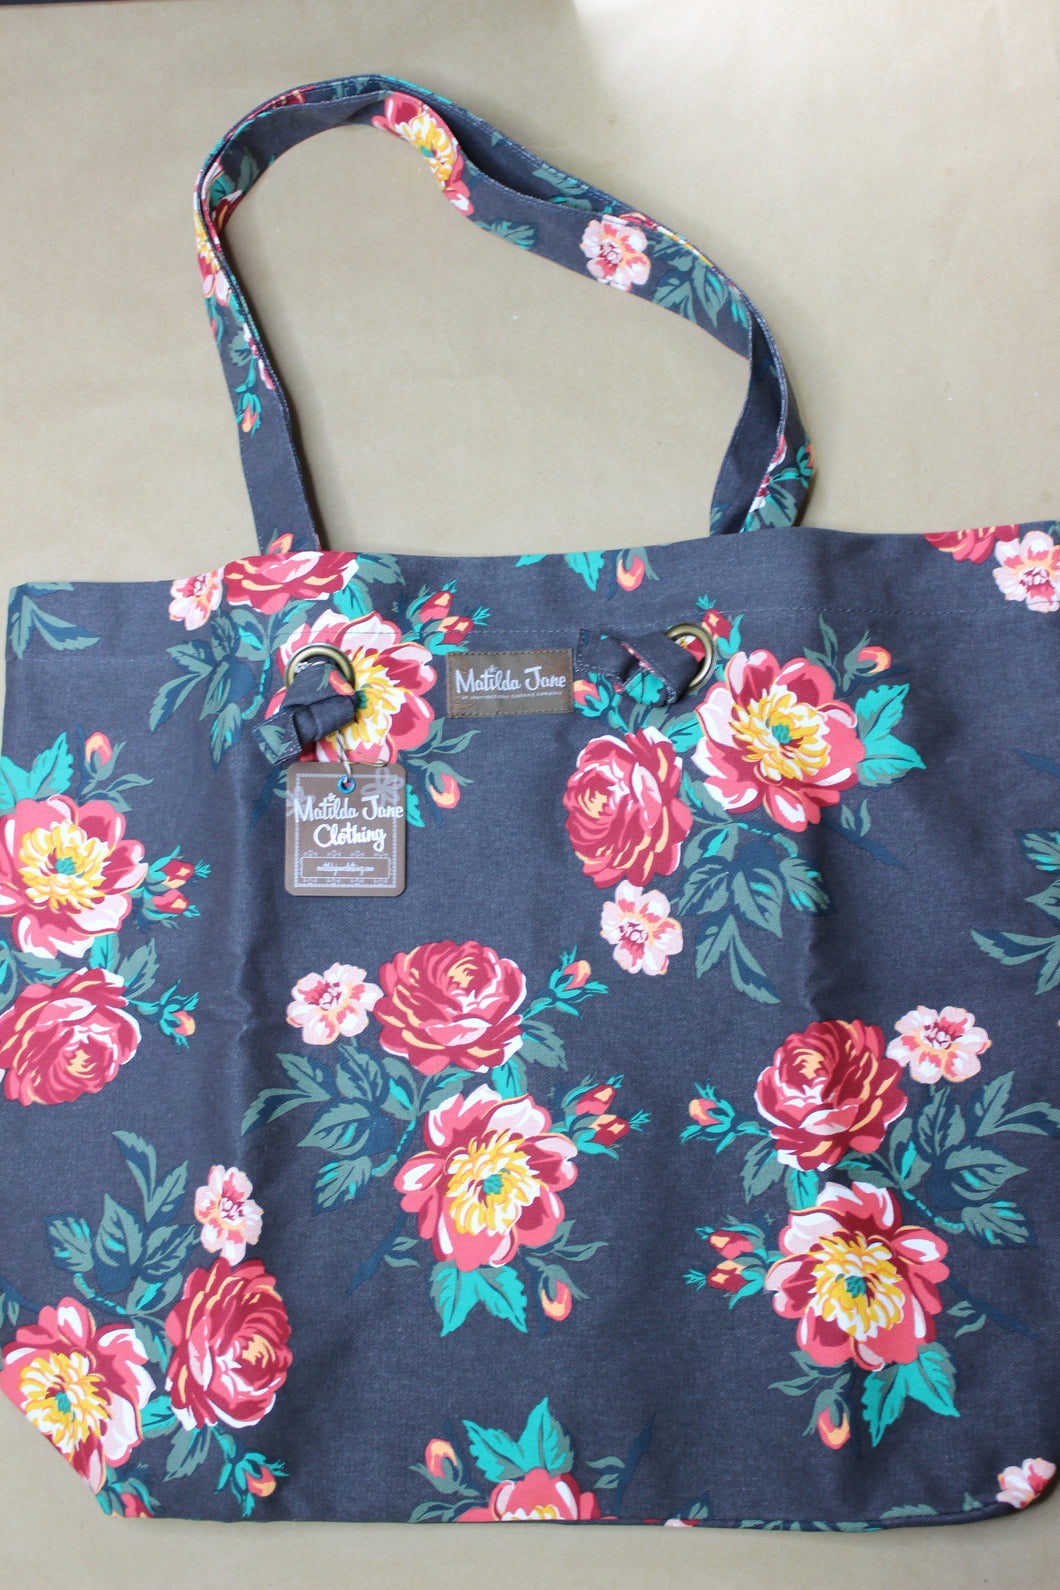 Matilda Jane Clothing Tote Bag - Conference Exclusive NEW One Size